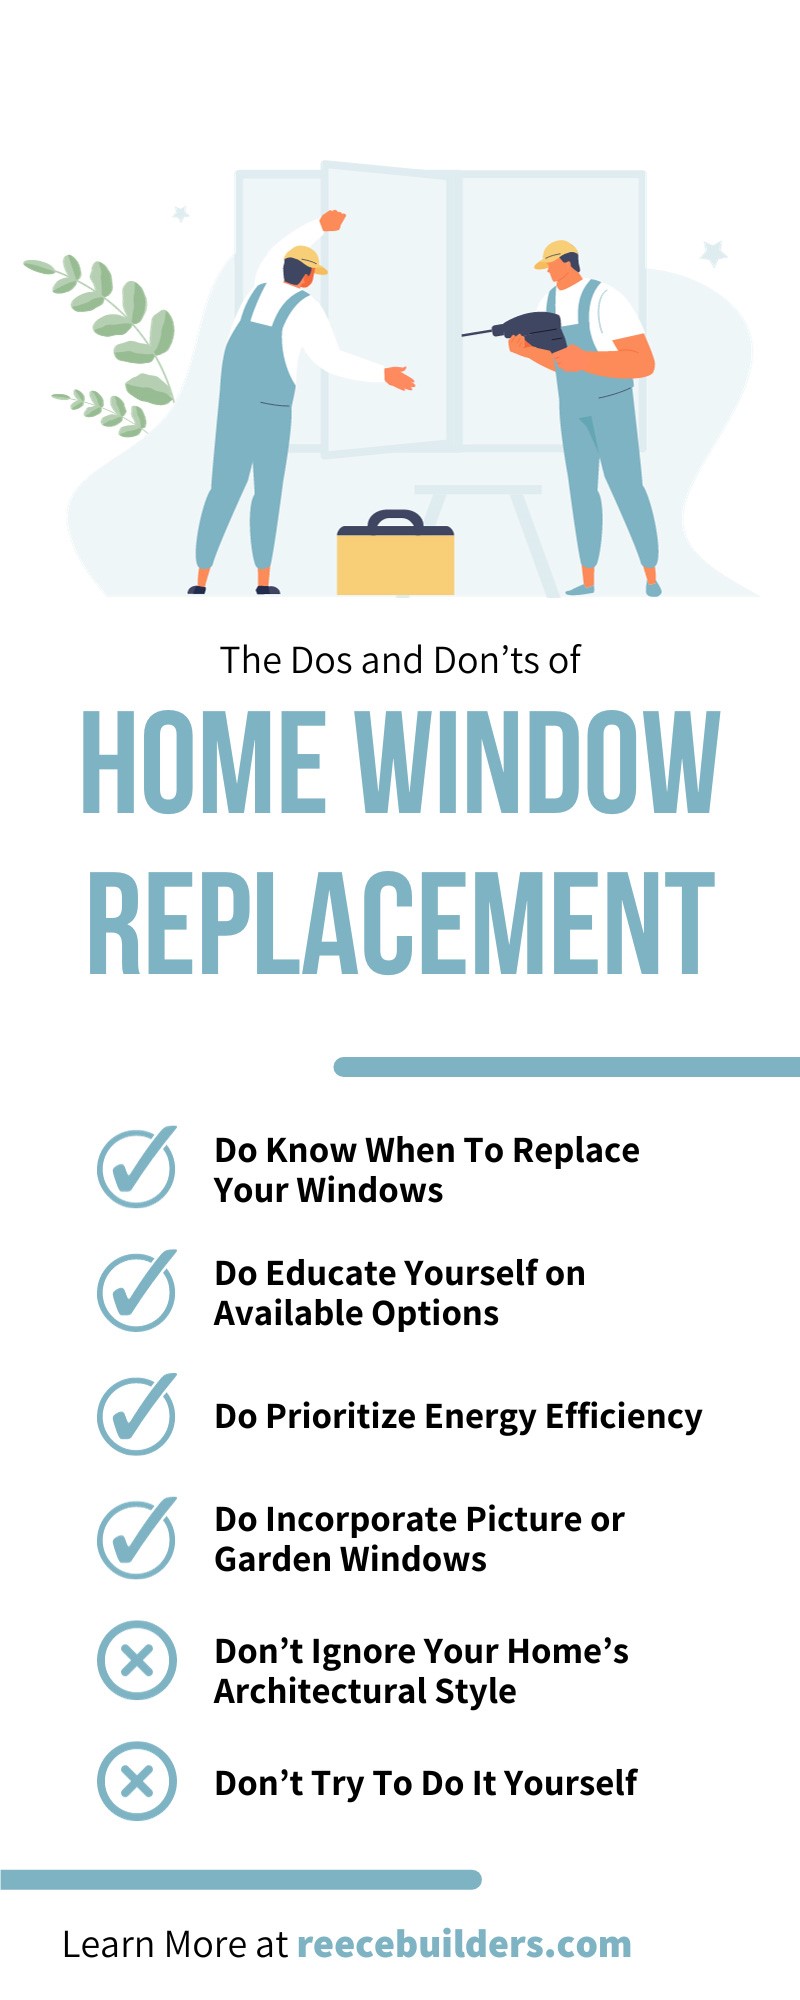 The Dos and Don’ts of Home Window Replacement